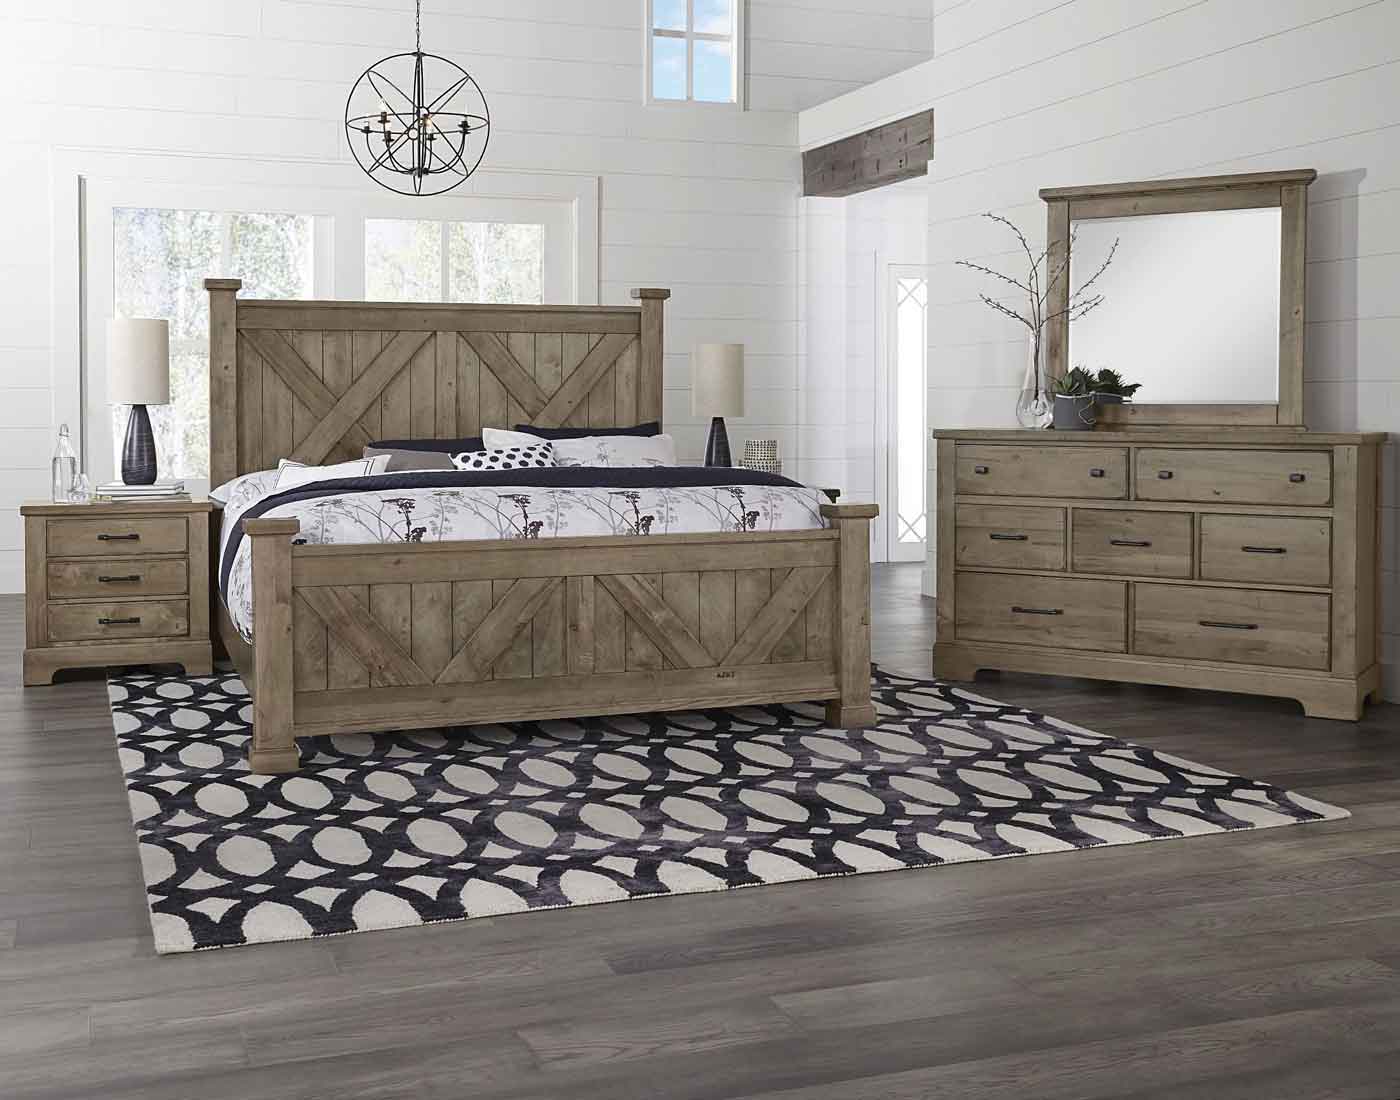 The Cool Rustic Bedroom Group Product Review